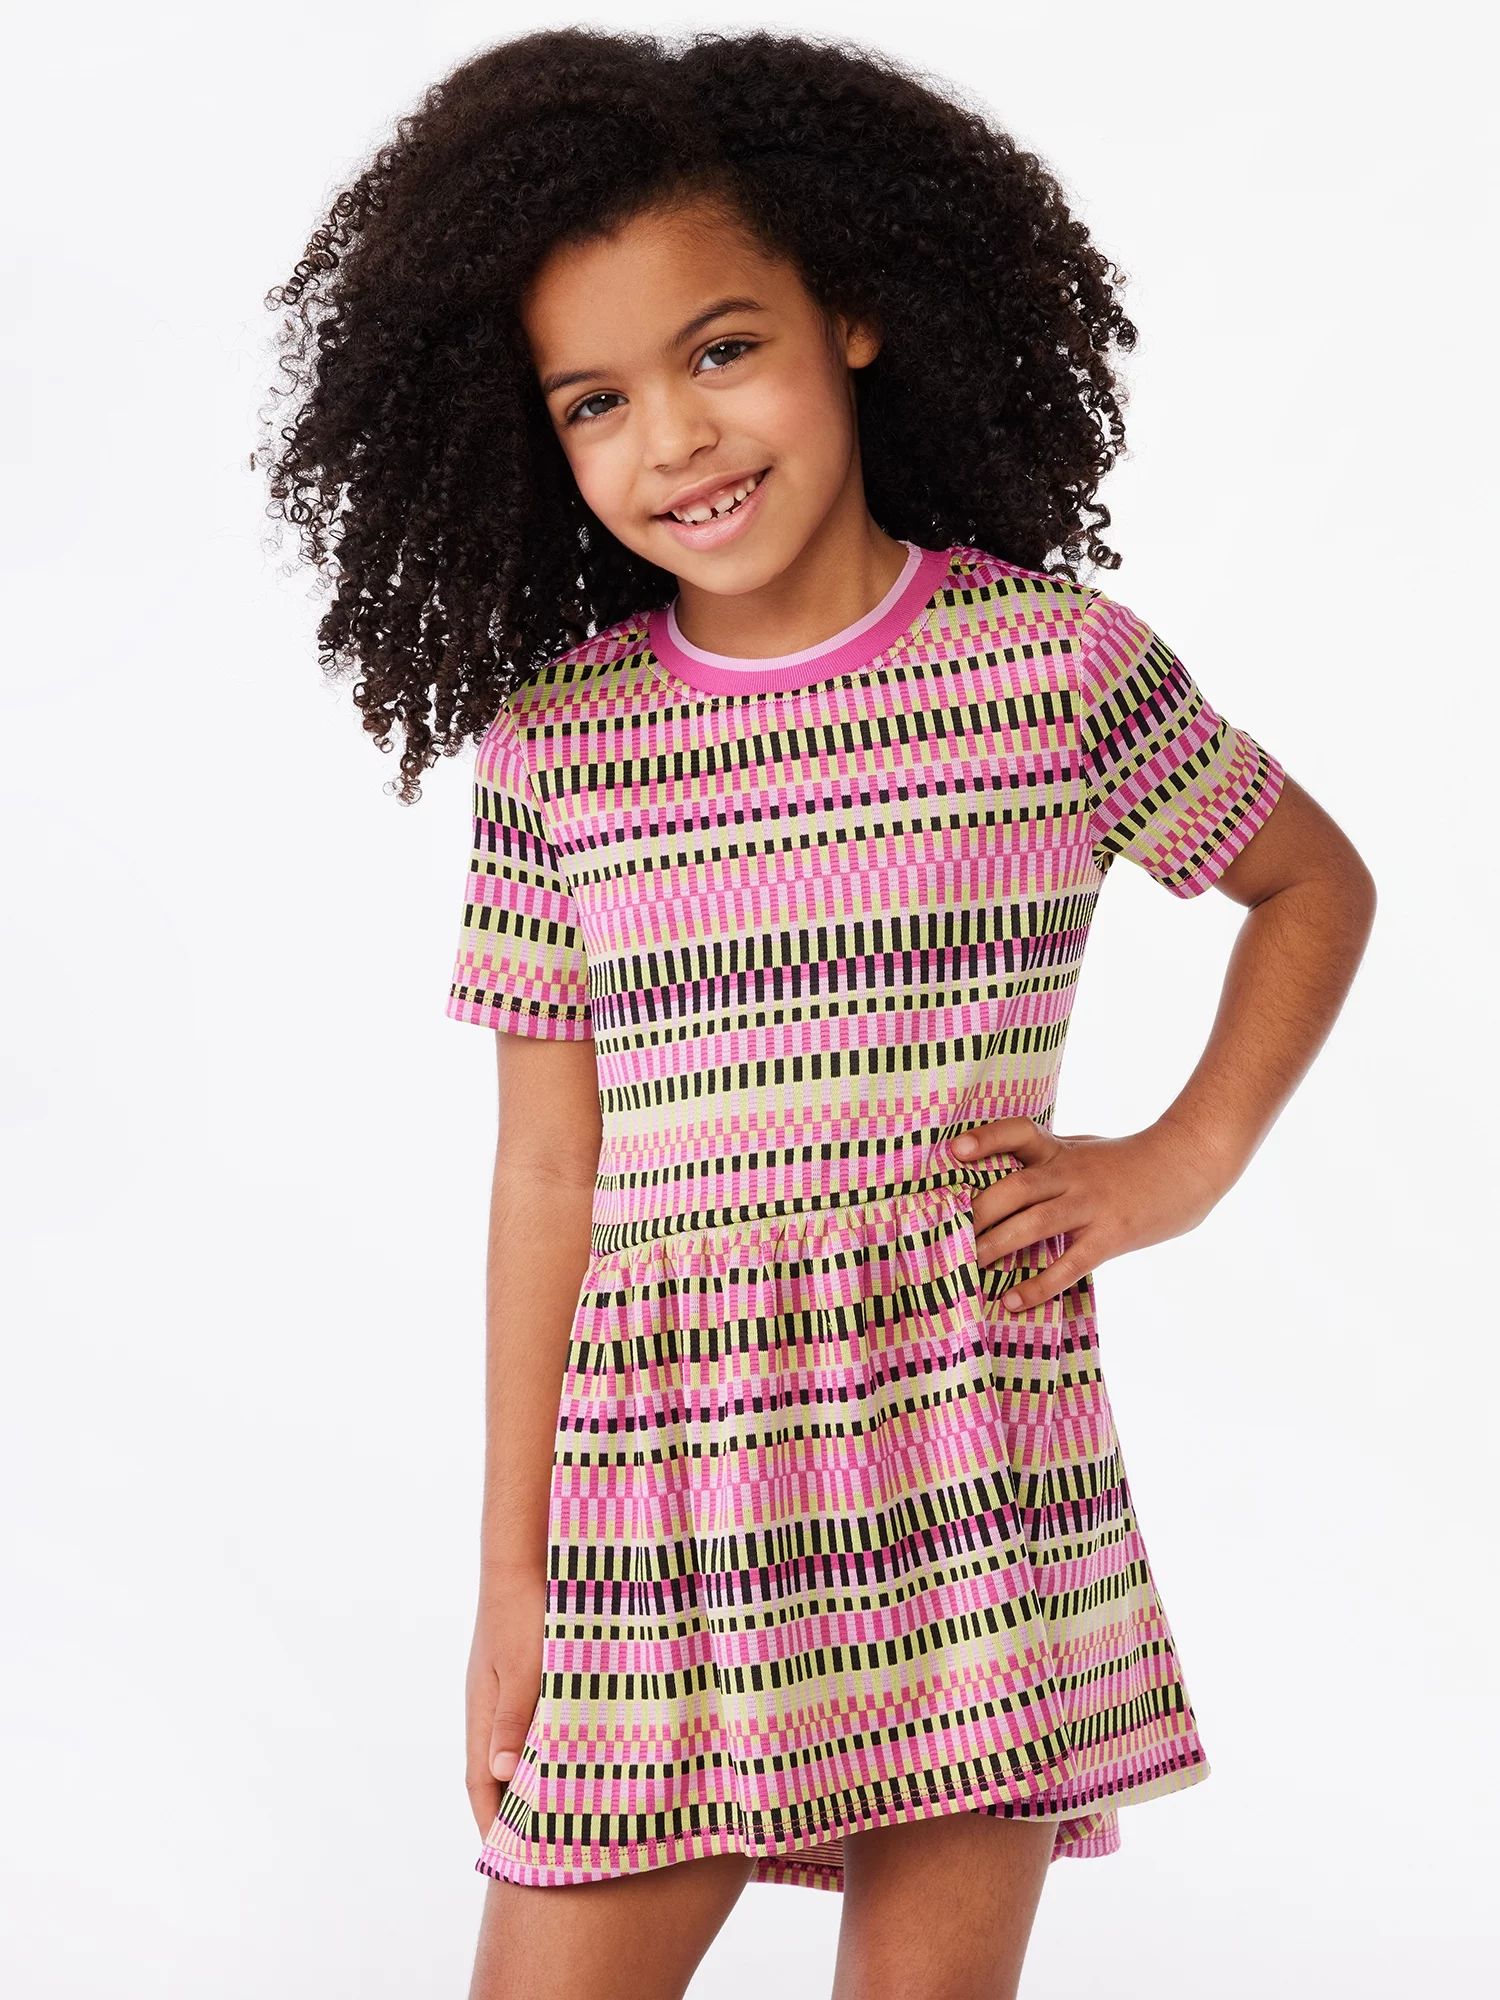 Scoop Girls Short Sleeve Fit and Flare Dress, Sizes 4-12 | Walmart (US)